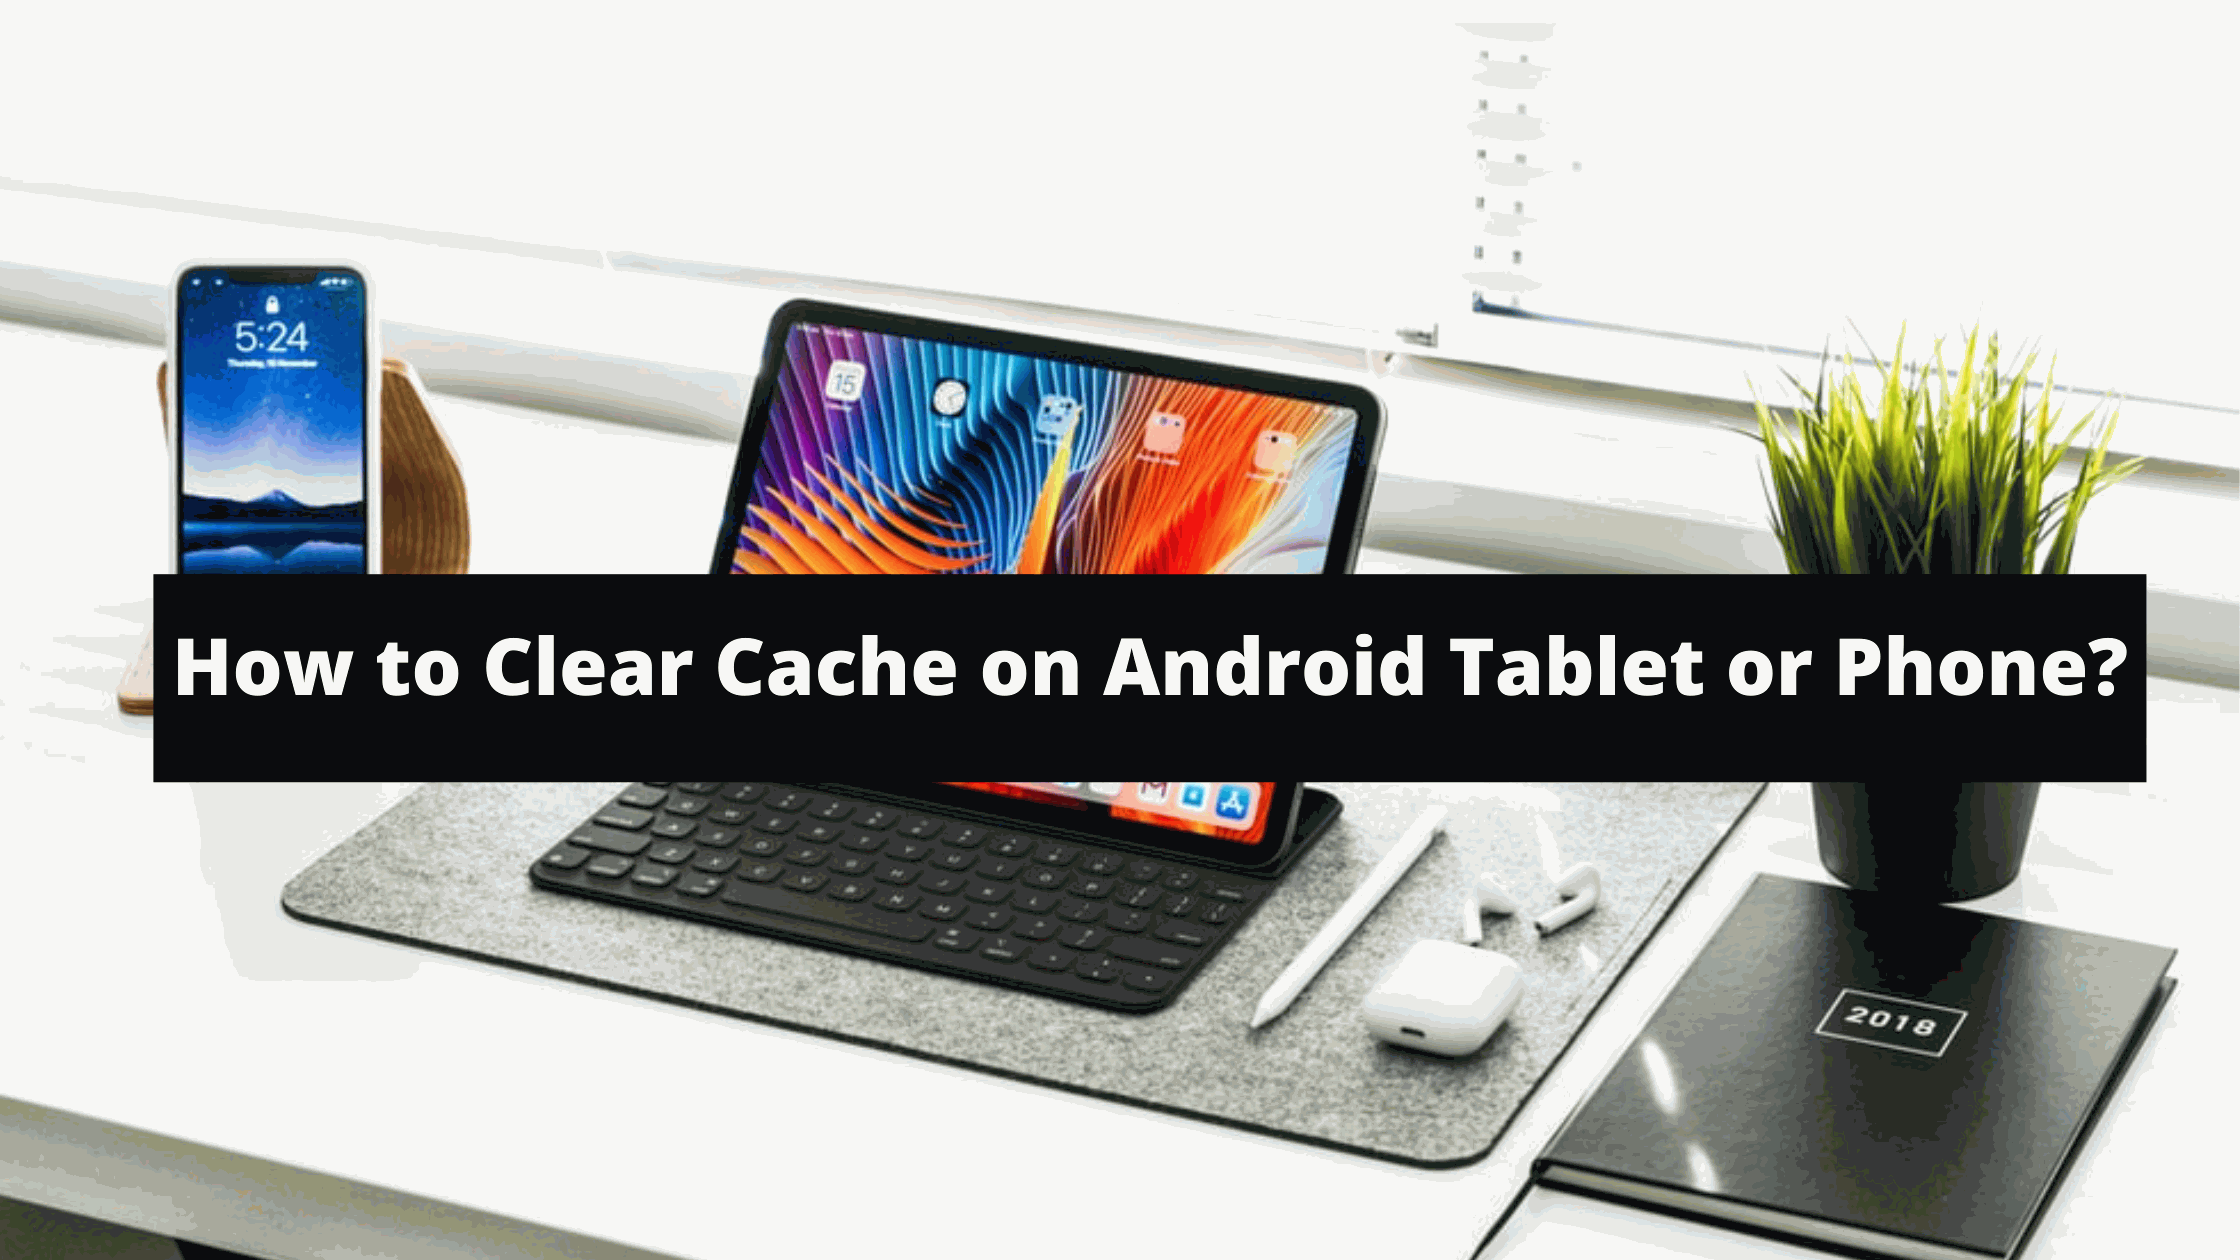 How to Clear Cache on Android Tablet or Phone?